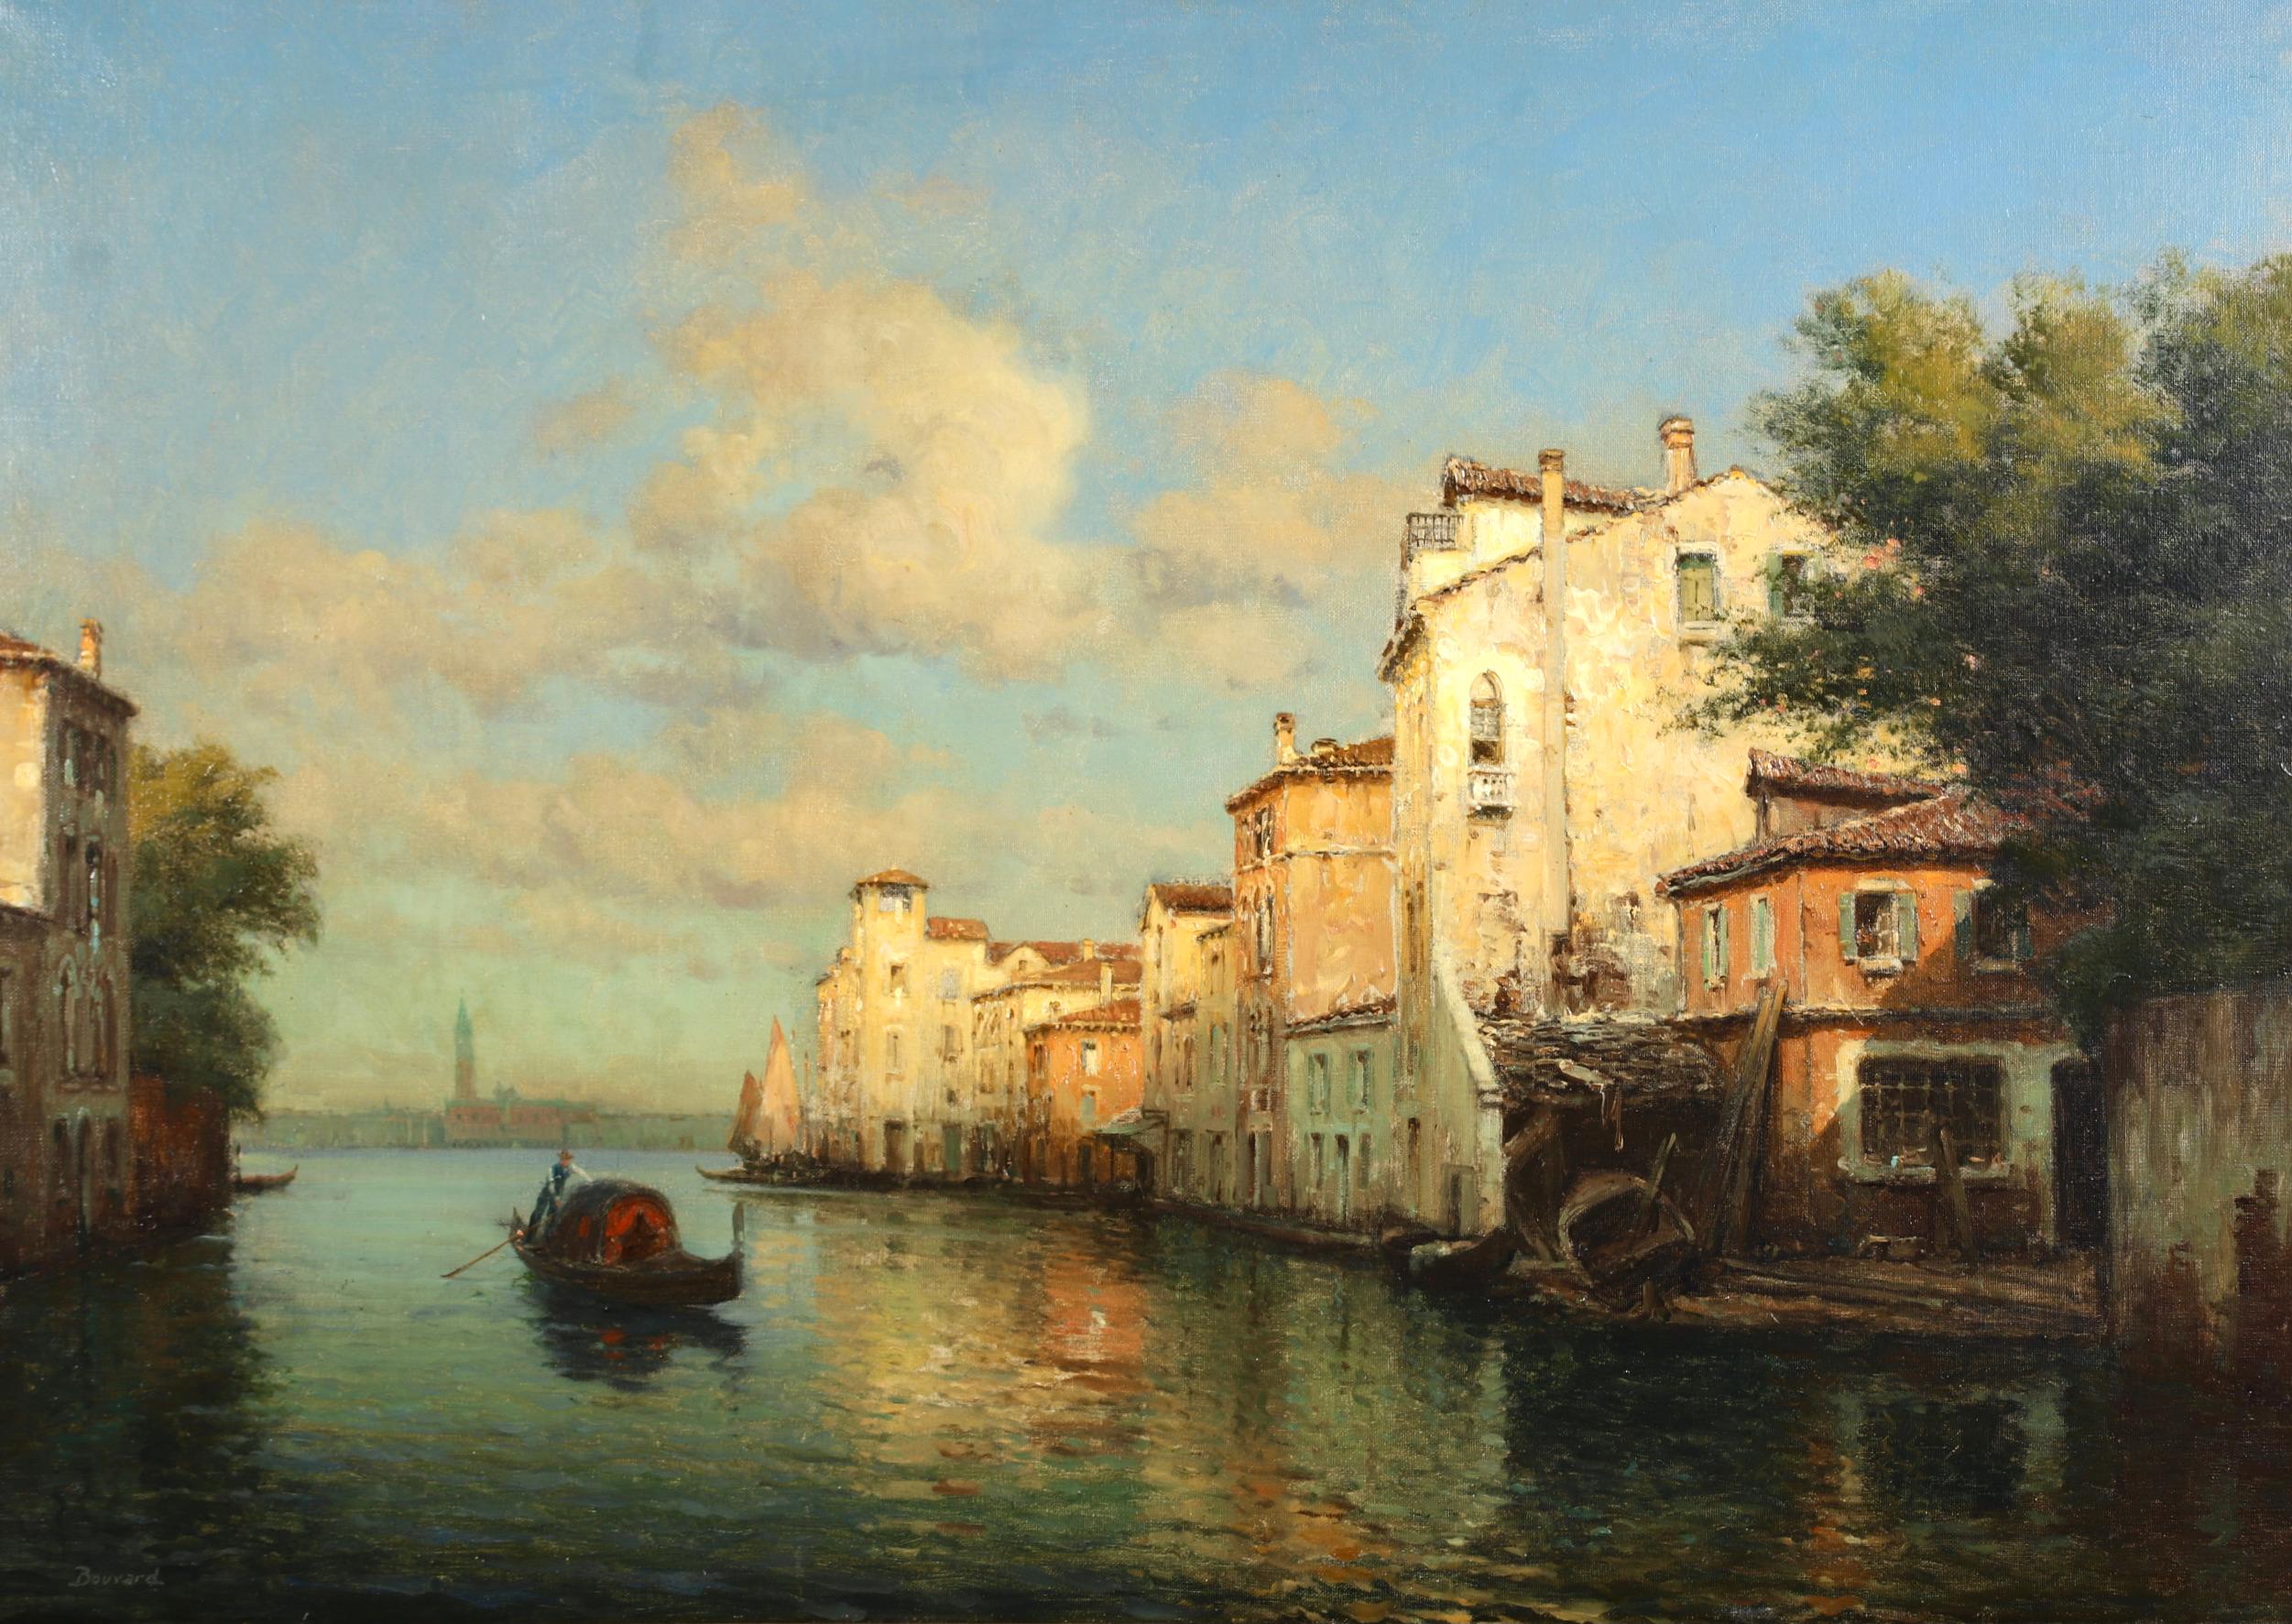 Signed impressionist landscape oil on canvas circa 1920 by French painter Antoine Bouvard Snr. The work depicts a figure rowing on a gondola beside buildings lining the canal at the port of Venice. The last light of the setting sun is illuminating